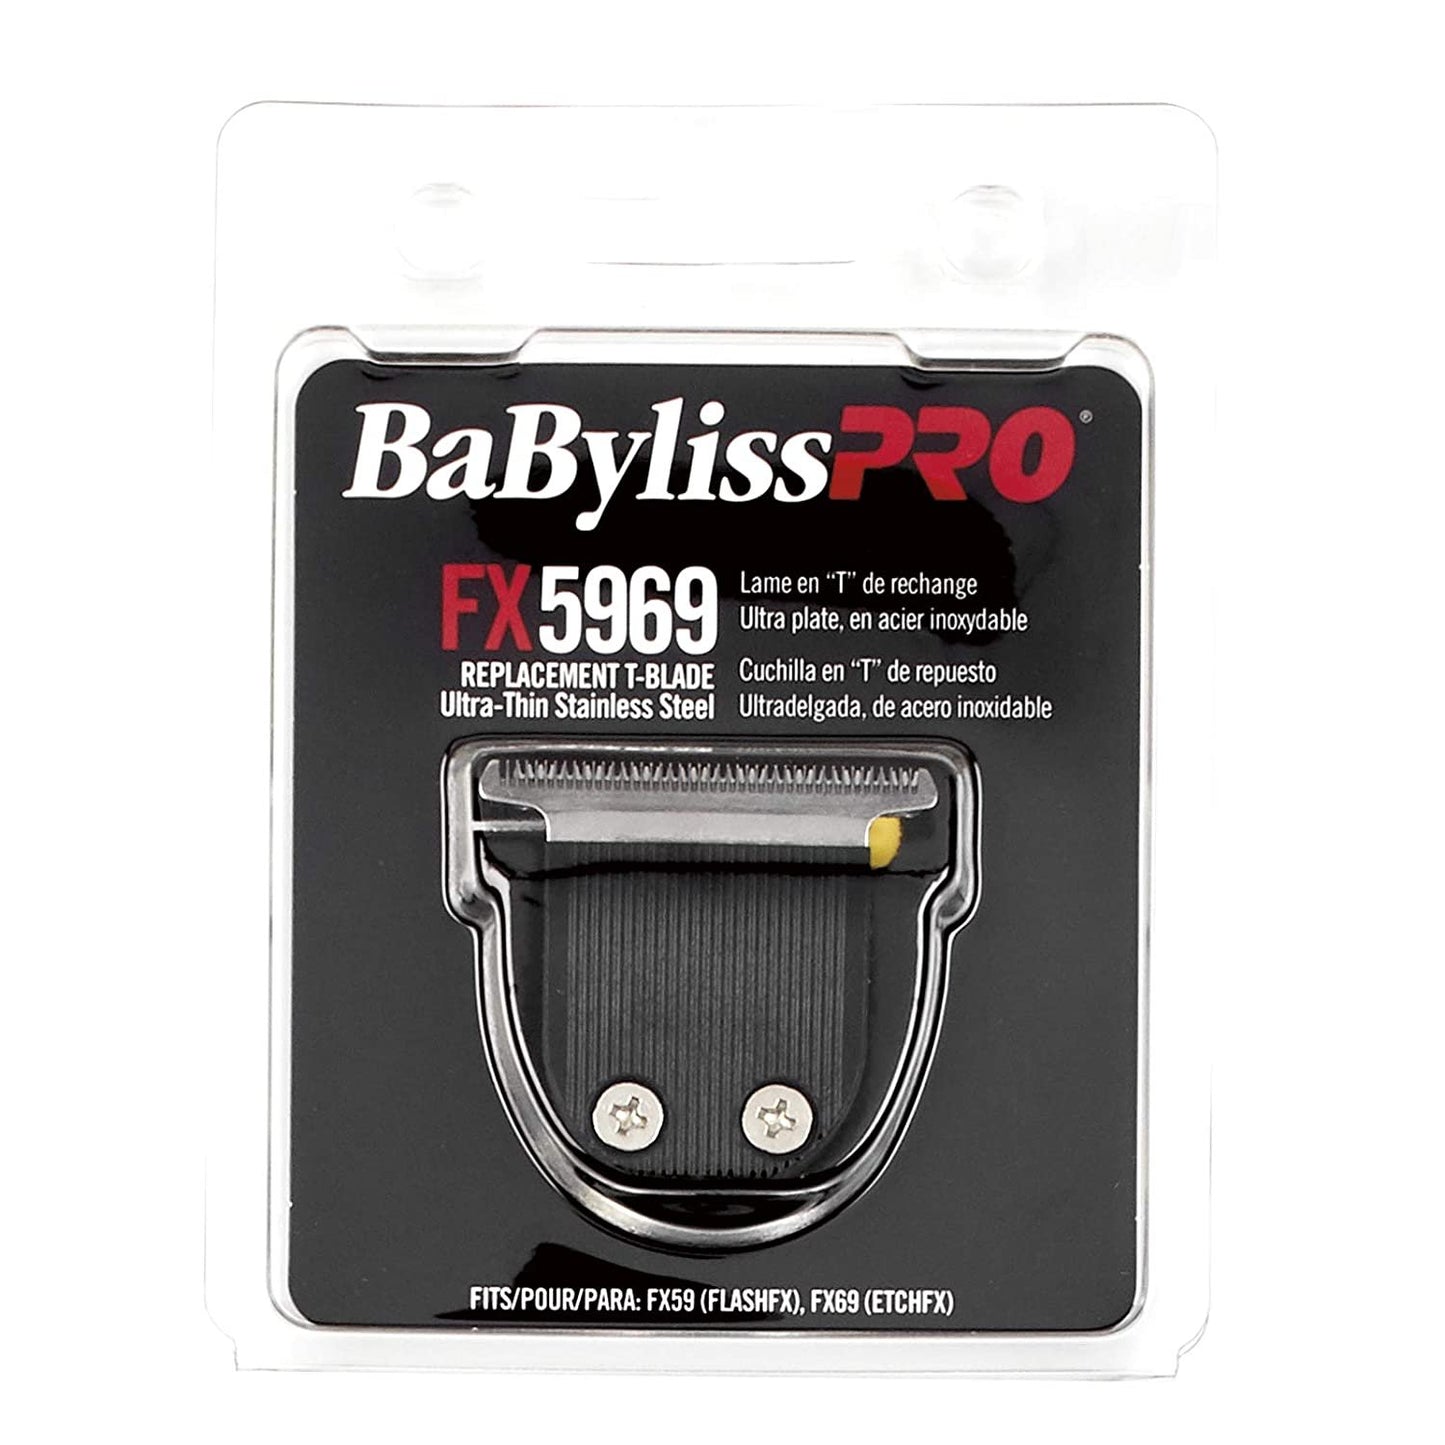 Babyliss Pro FX5969 Replacement Blade | Babyliss